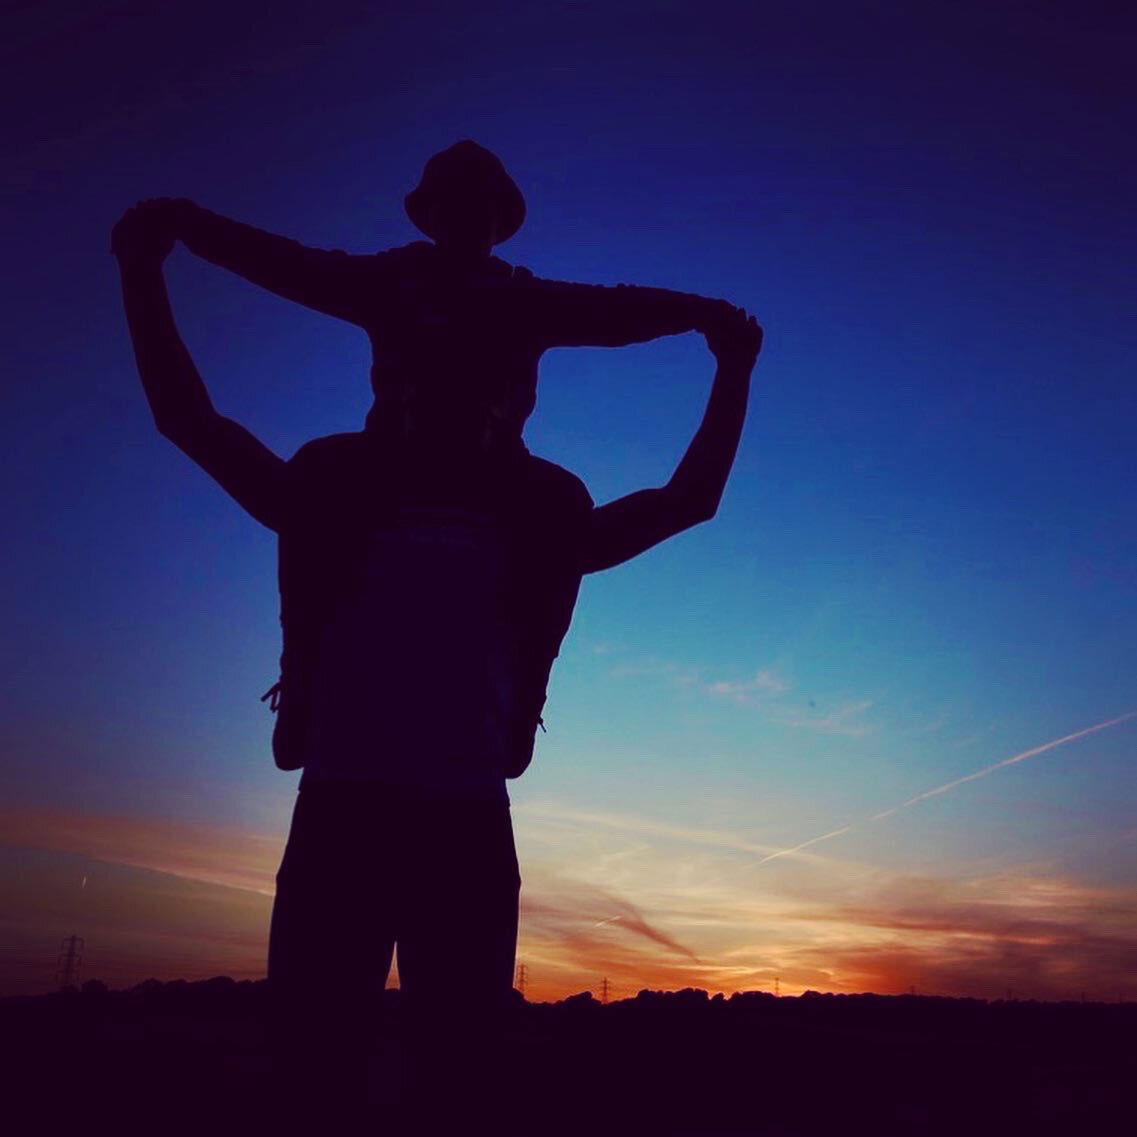 Silhouette of Brother Giving Shoulder Ride to Brother